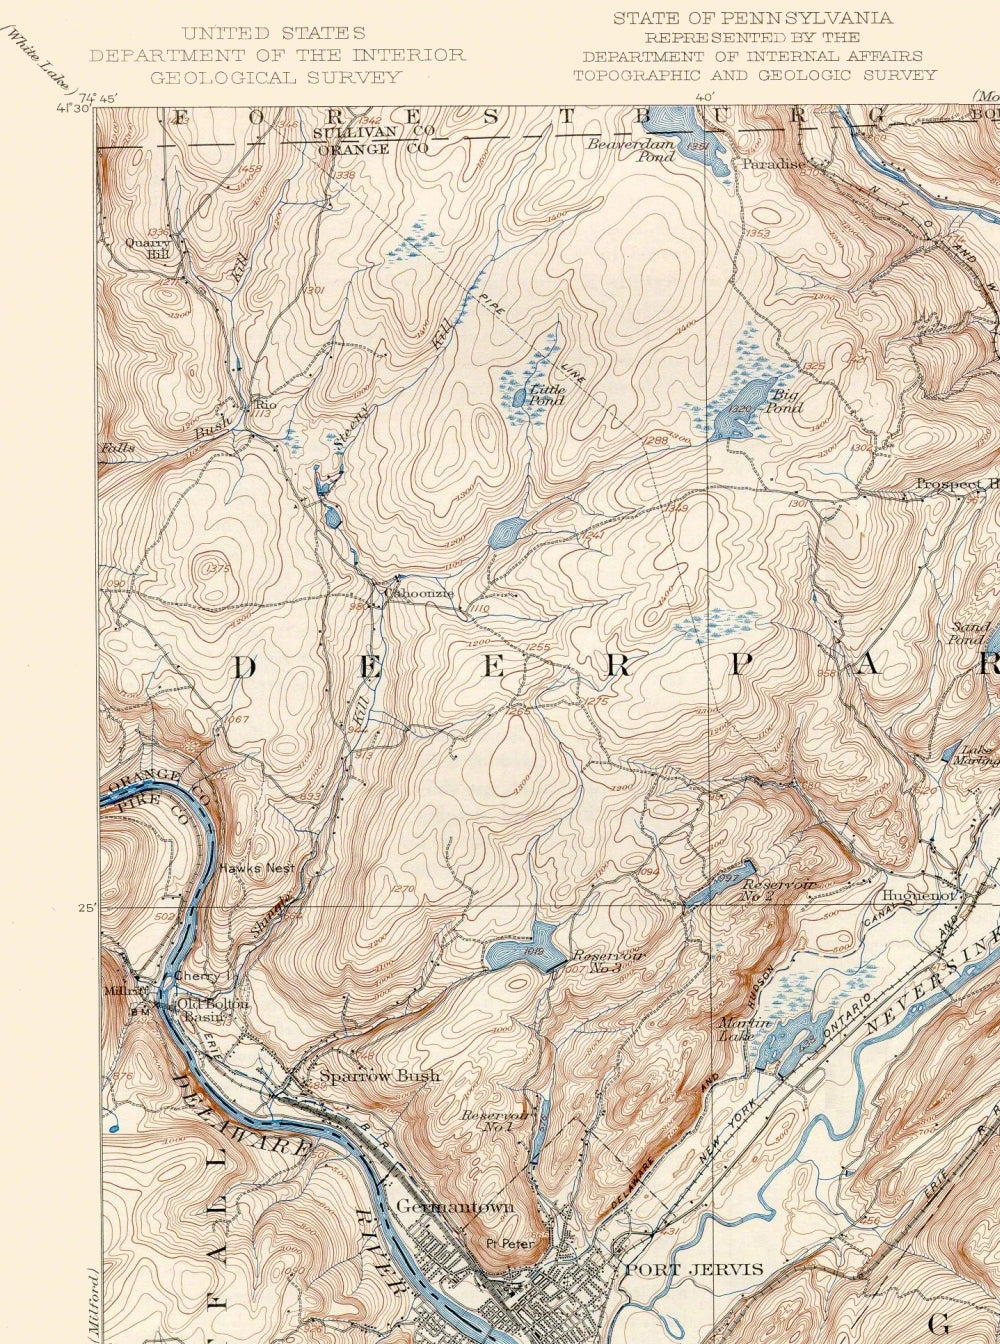 Topographical Map - Port Jervis New York New Jersey Pennsylvania Quad - USGS 1908 - 23 x 30 - Vintage Wall Art